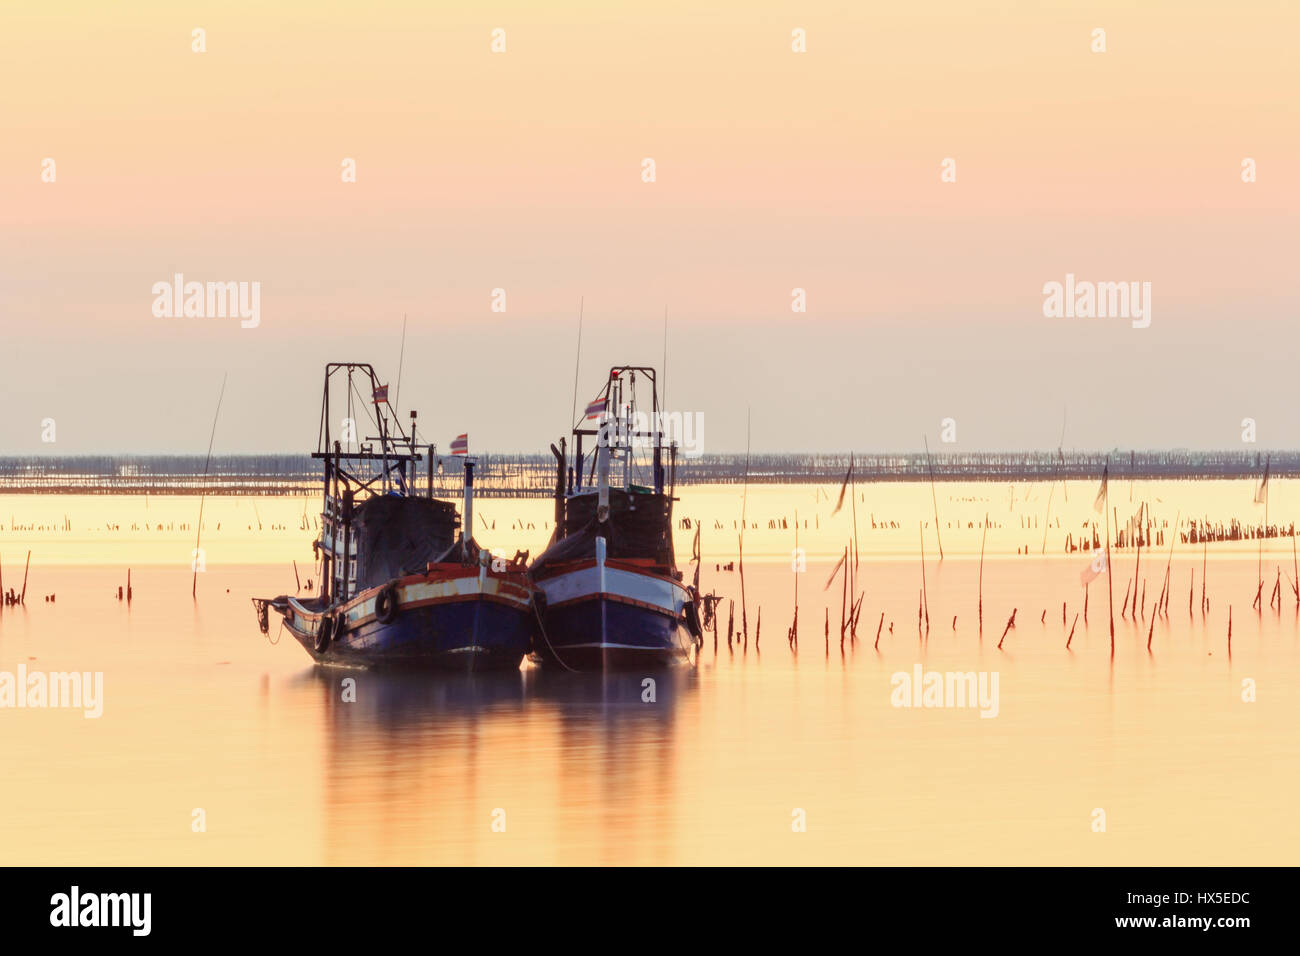 Small fishing boats used as a vehicle for finding fish in the sea.at sunset Stock Photo